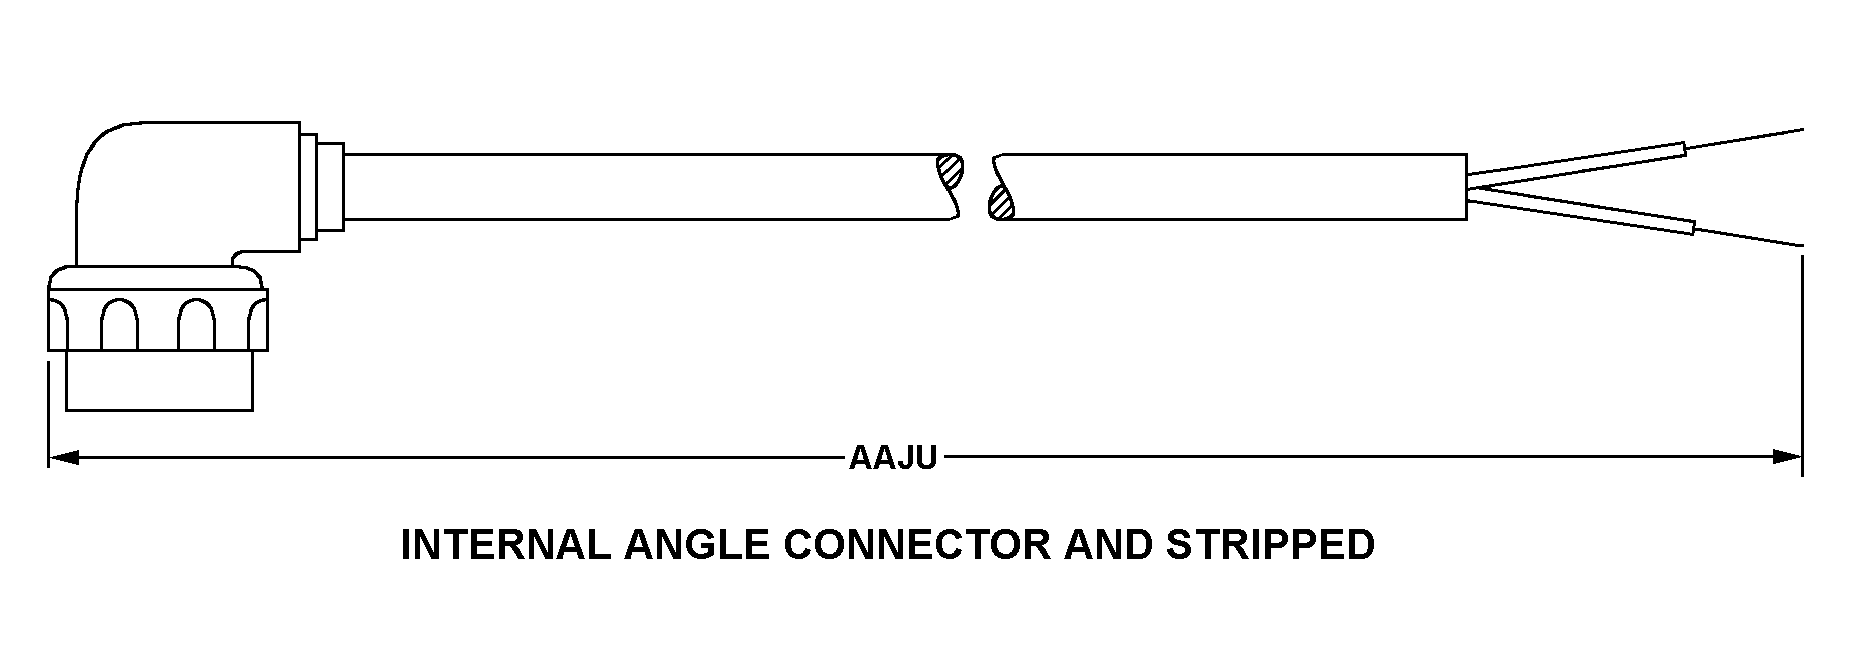 INTERNAL ANGLE CONNECTOR AND STRIPPED style nsn 6150-01-360-9820